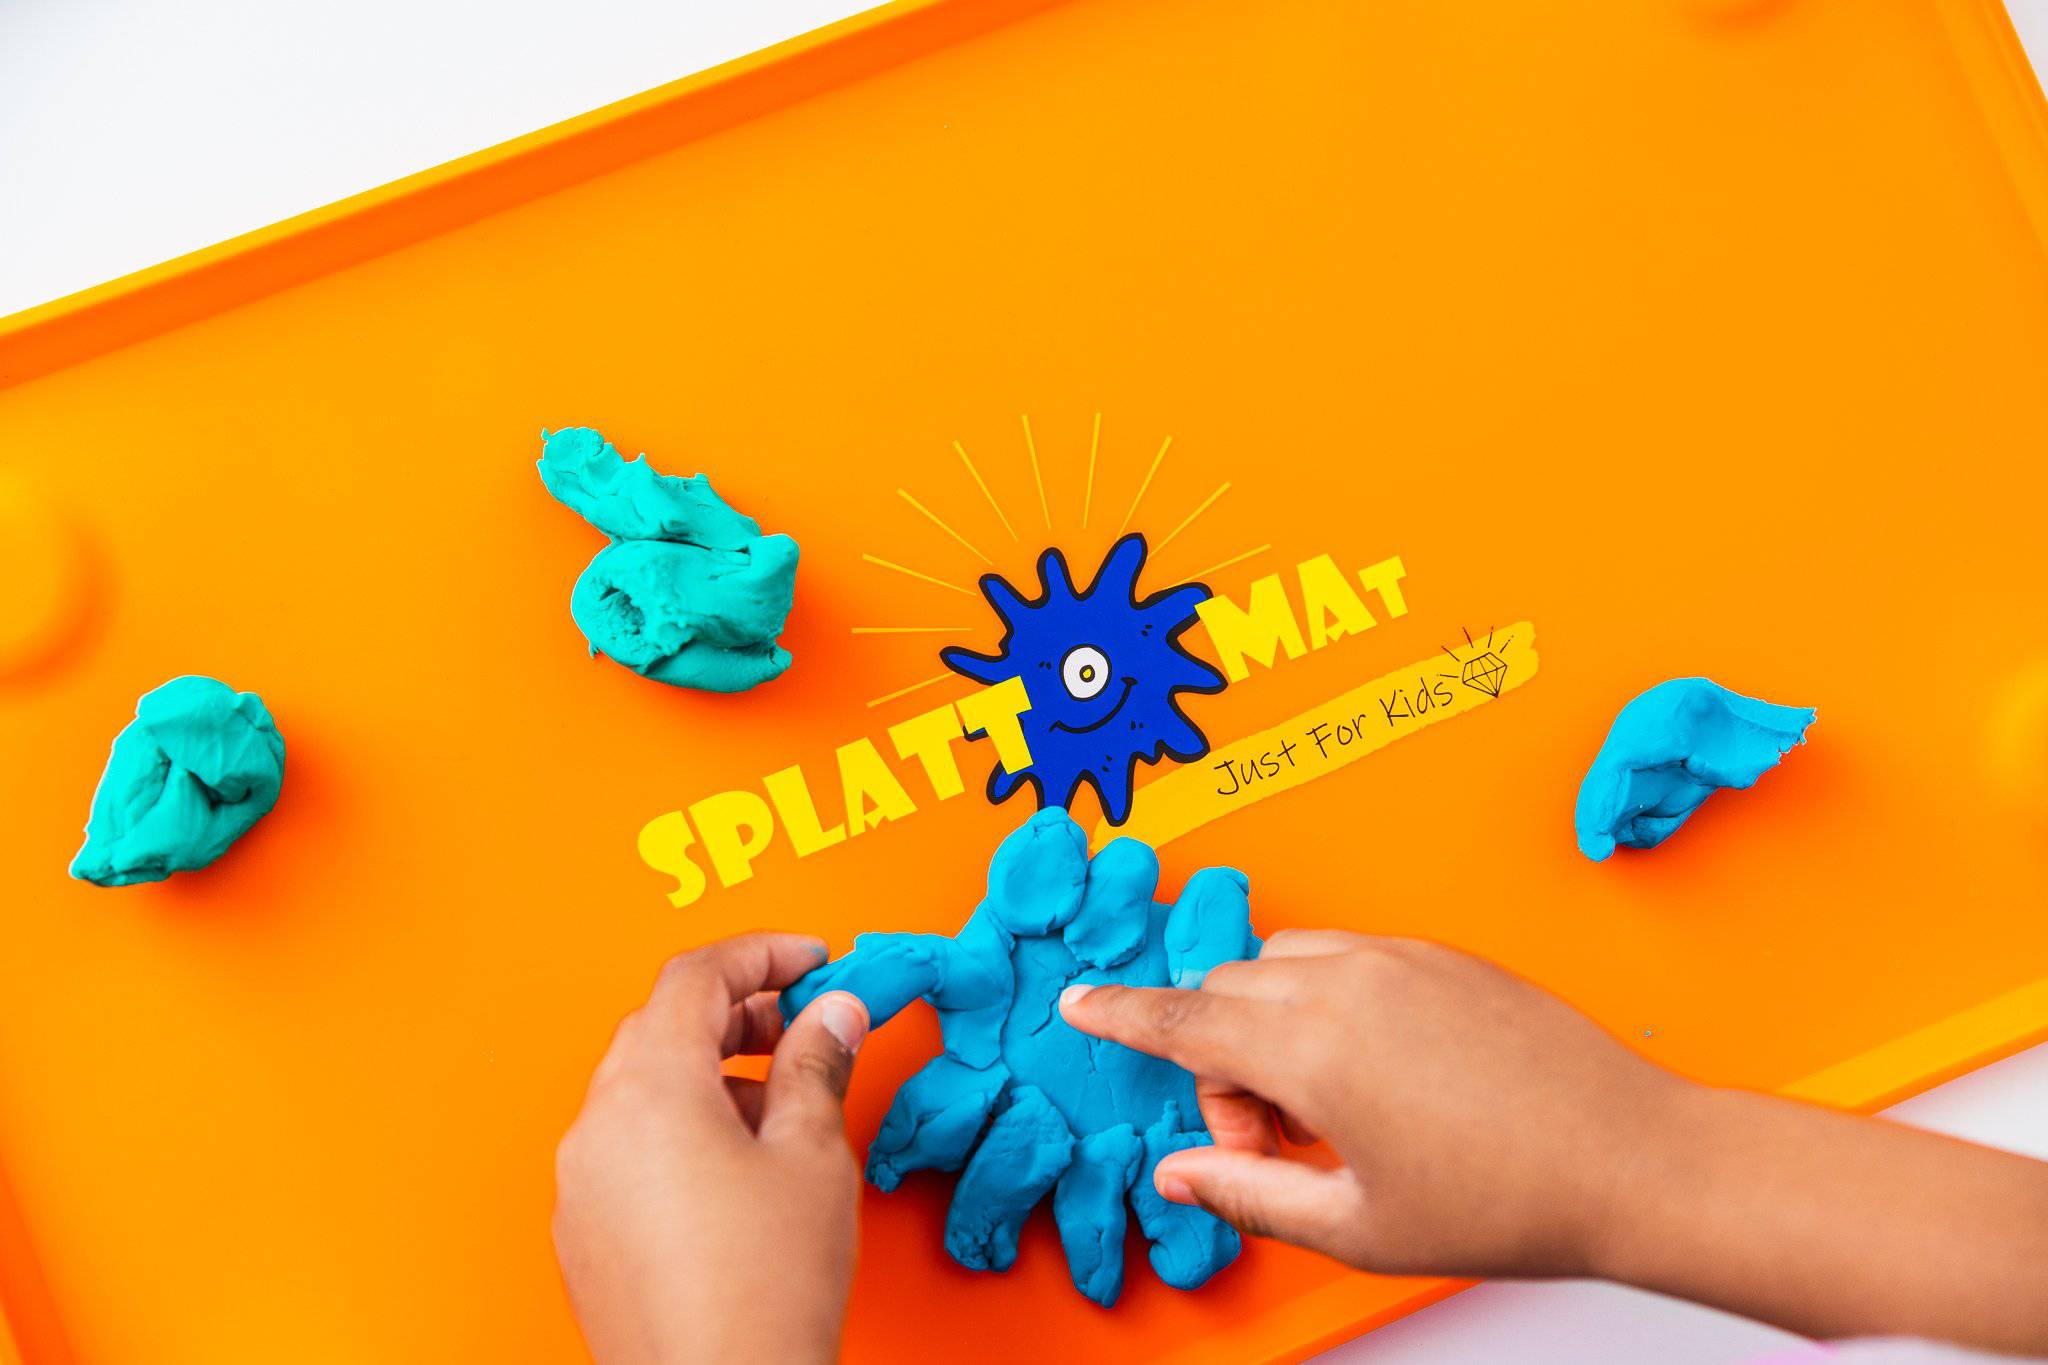 New Splattmat Premium All Ages Suctioned Silicone Placemat for